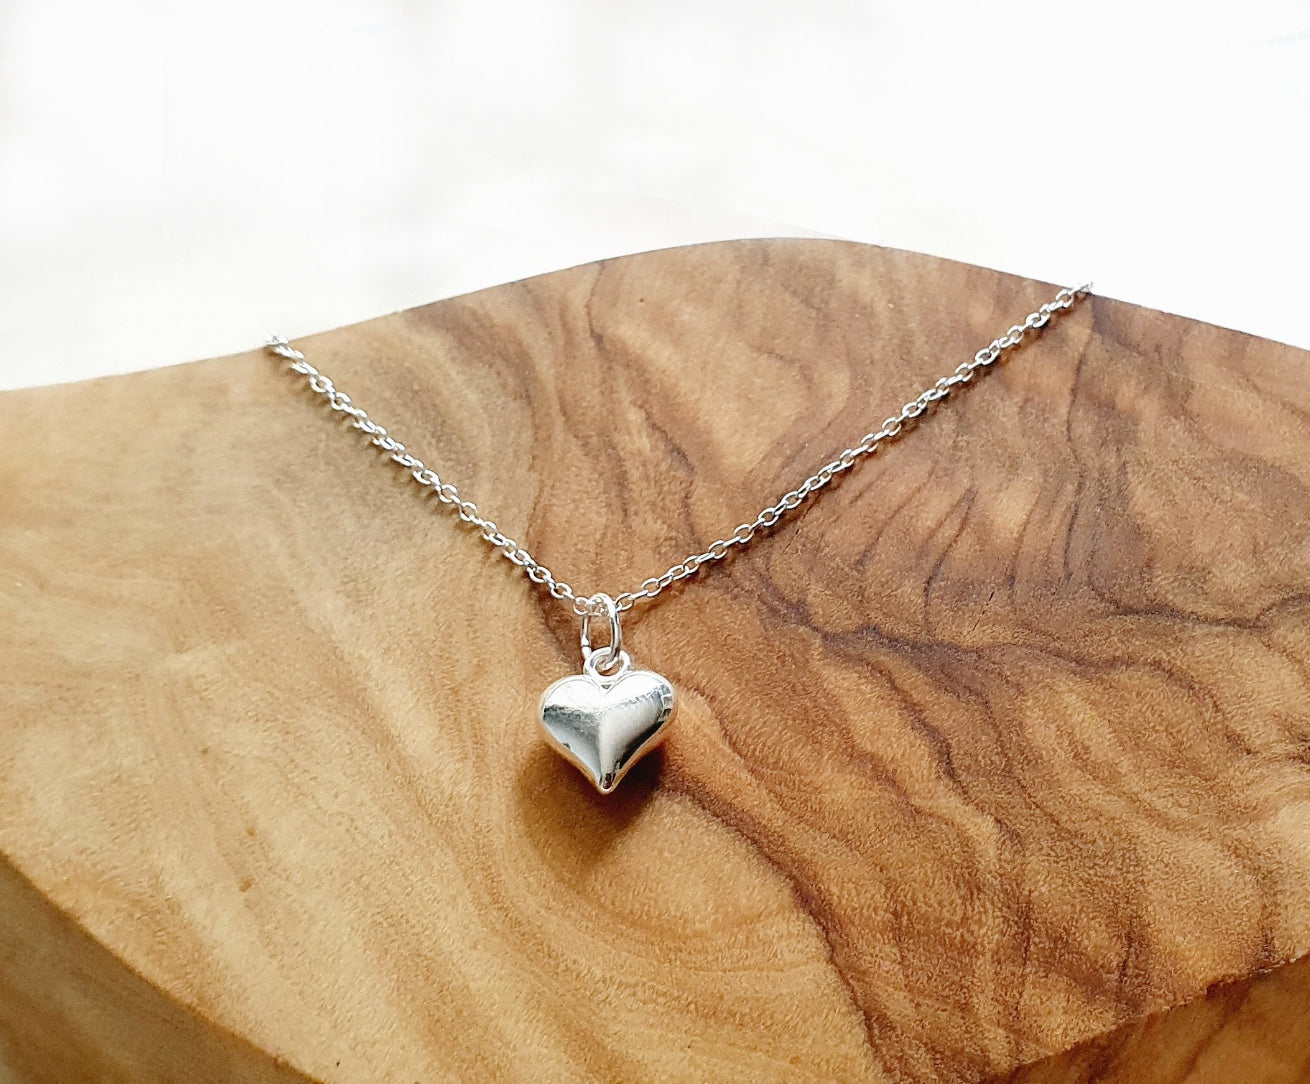 Graduation Puffy Heart Necklace in Sterling Silver 925, Personalised Gift